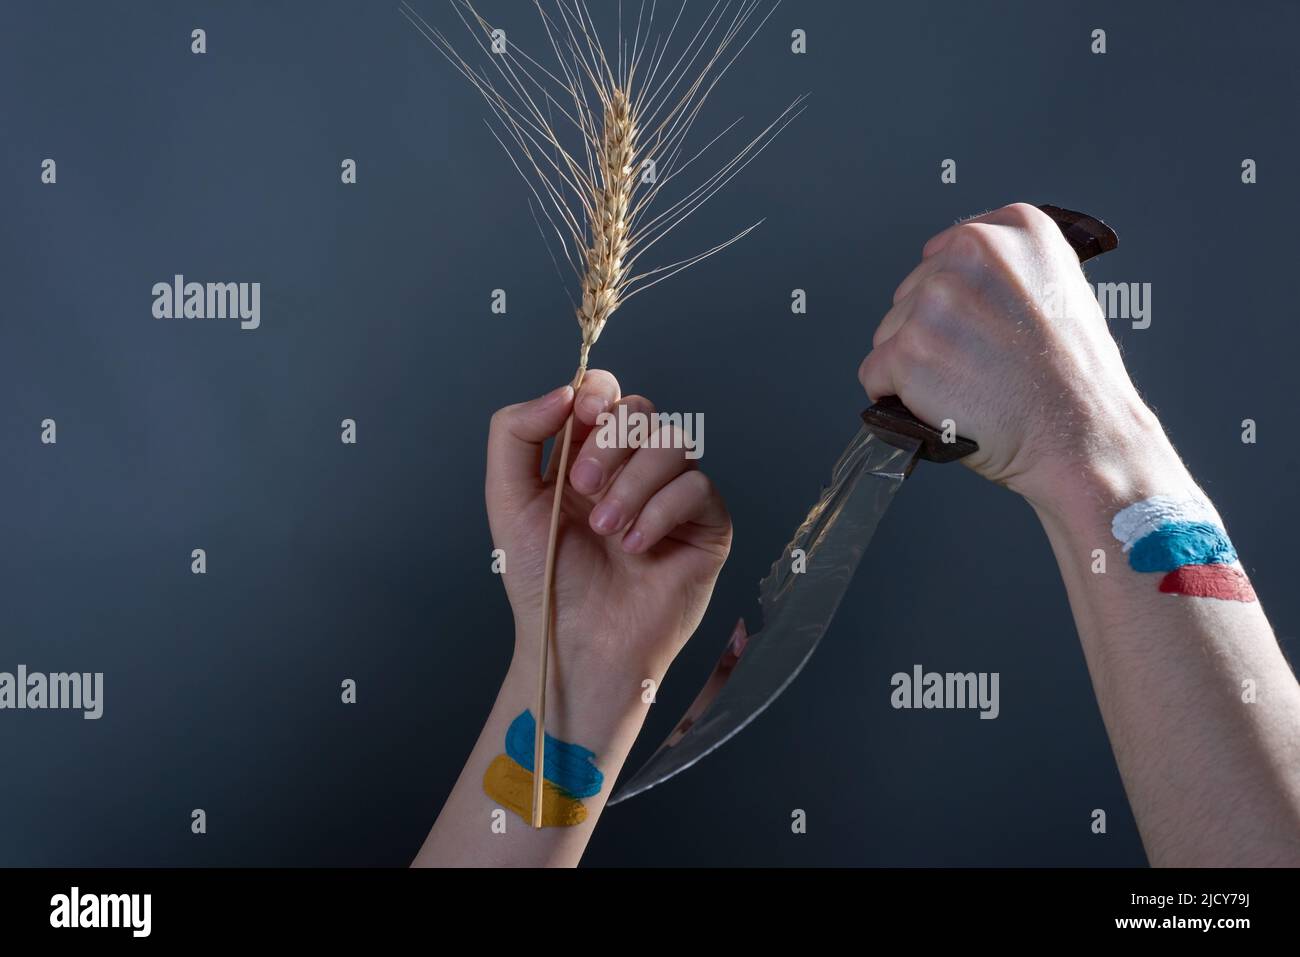 russia vs ukraine concept russia threatens with a knife Stock Photo